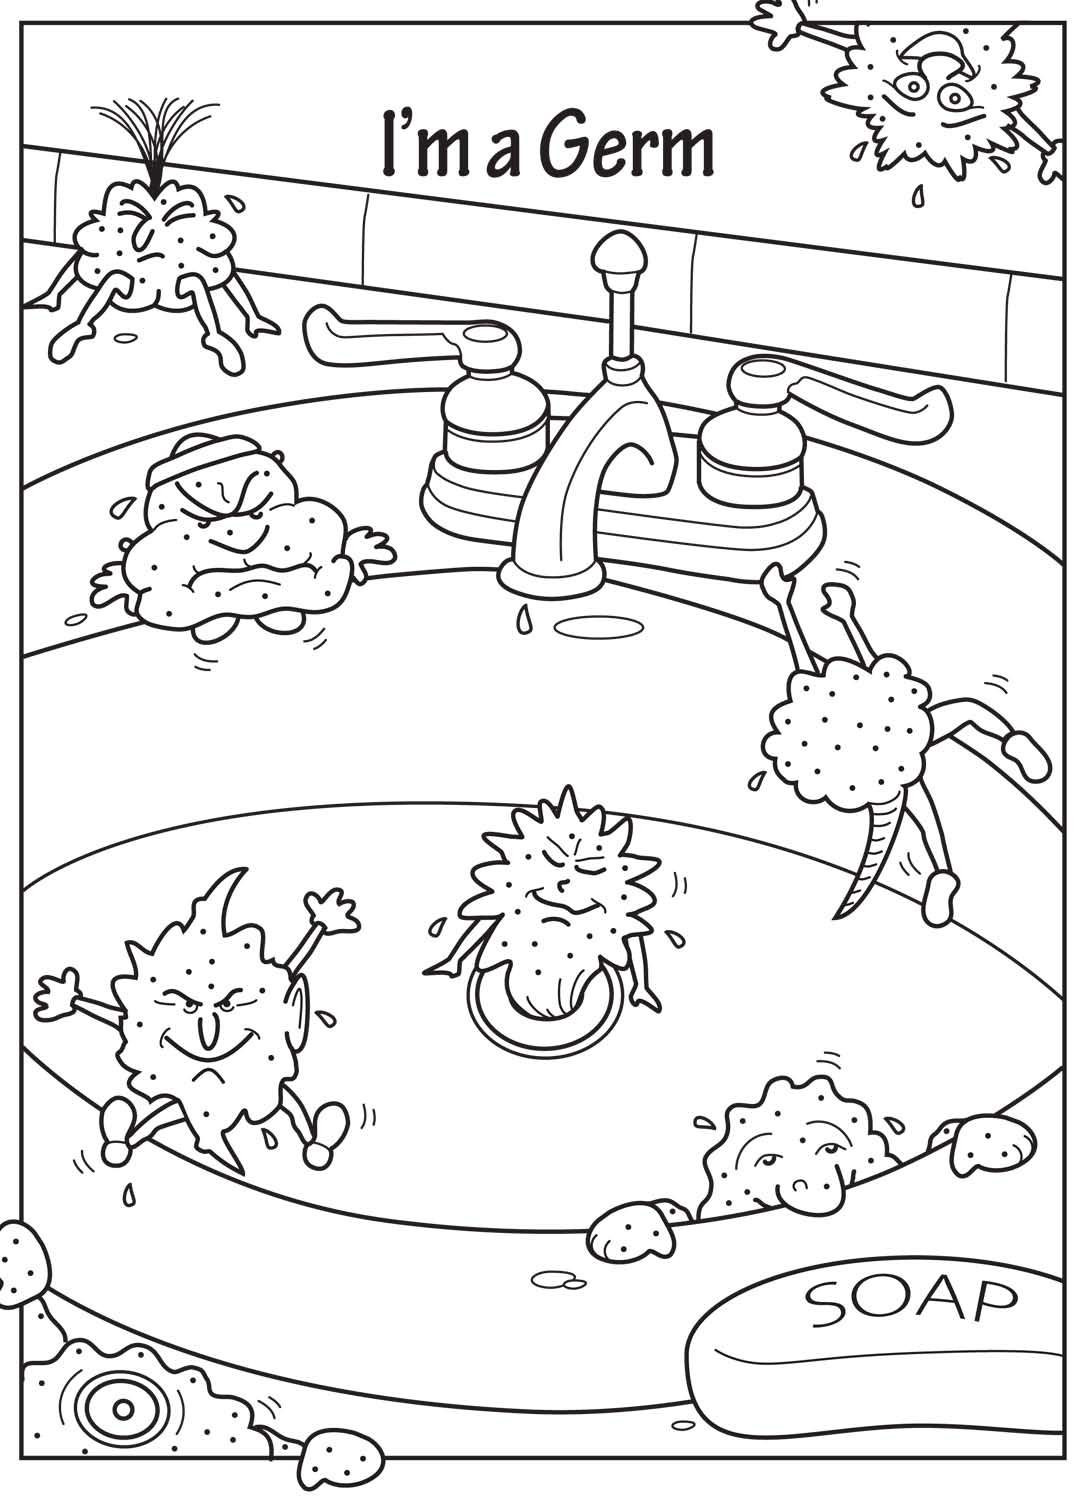 Germ Worksheets for First Grade Printable Coloring Pages Of Germs